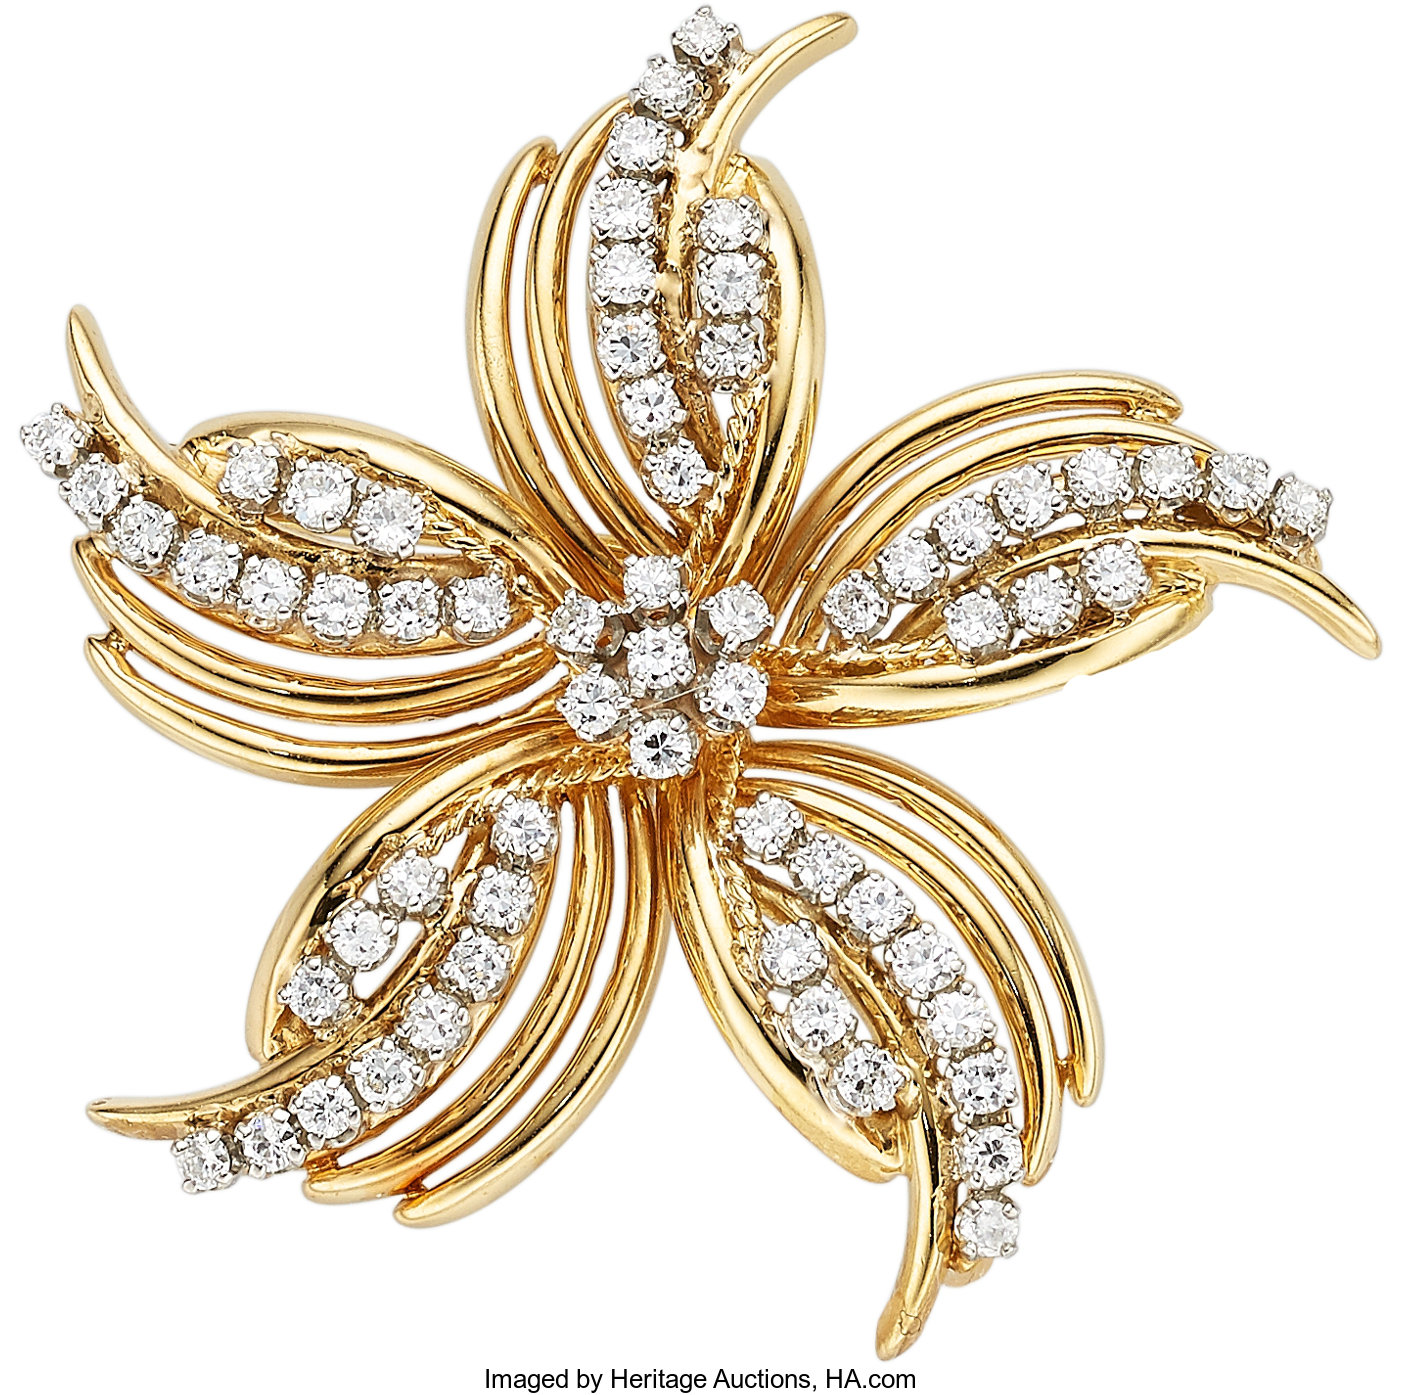 Diamond, Gold Brooch. ... Estate Jewelry Brooches - Pins | Lot #55507 ...